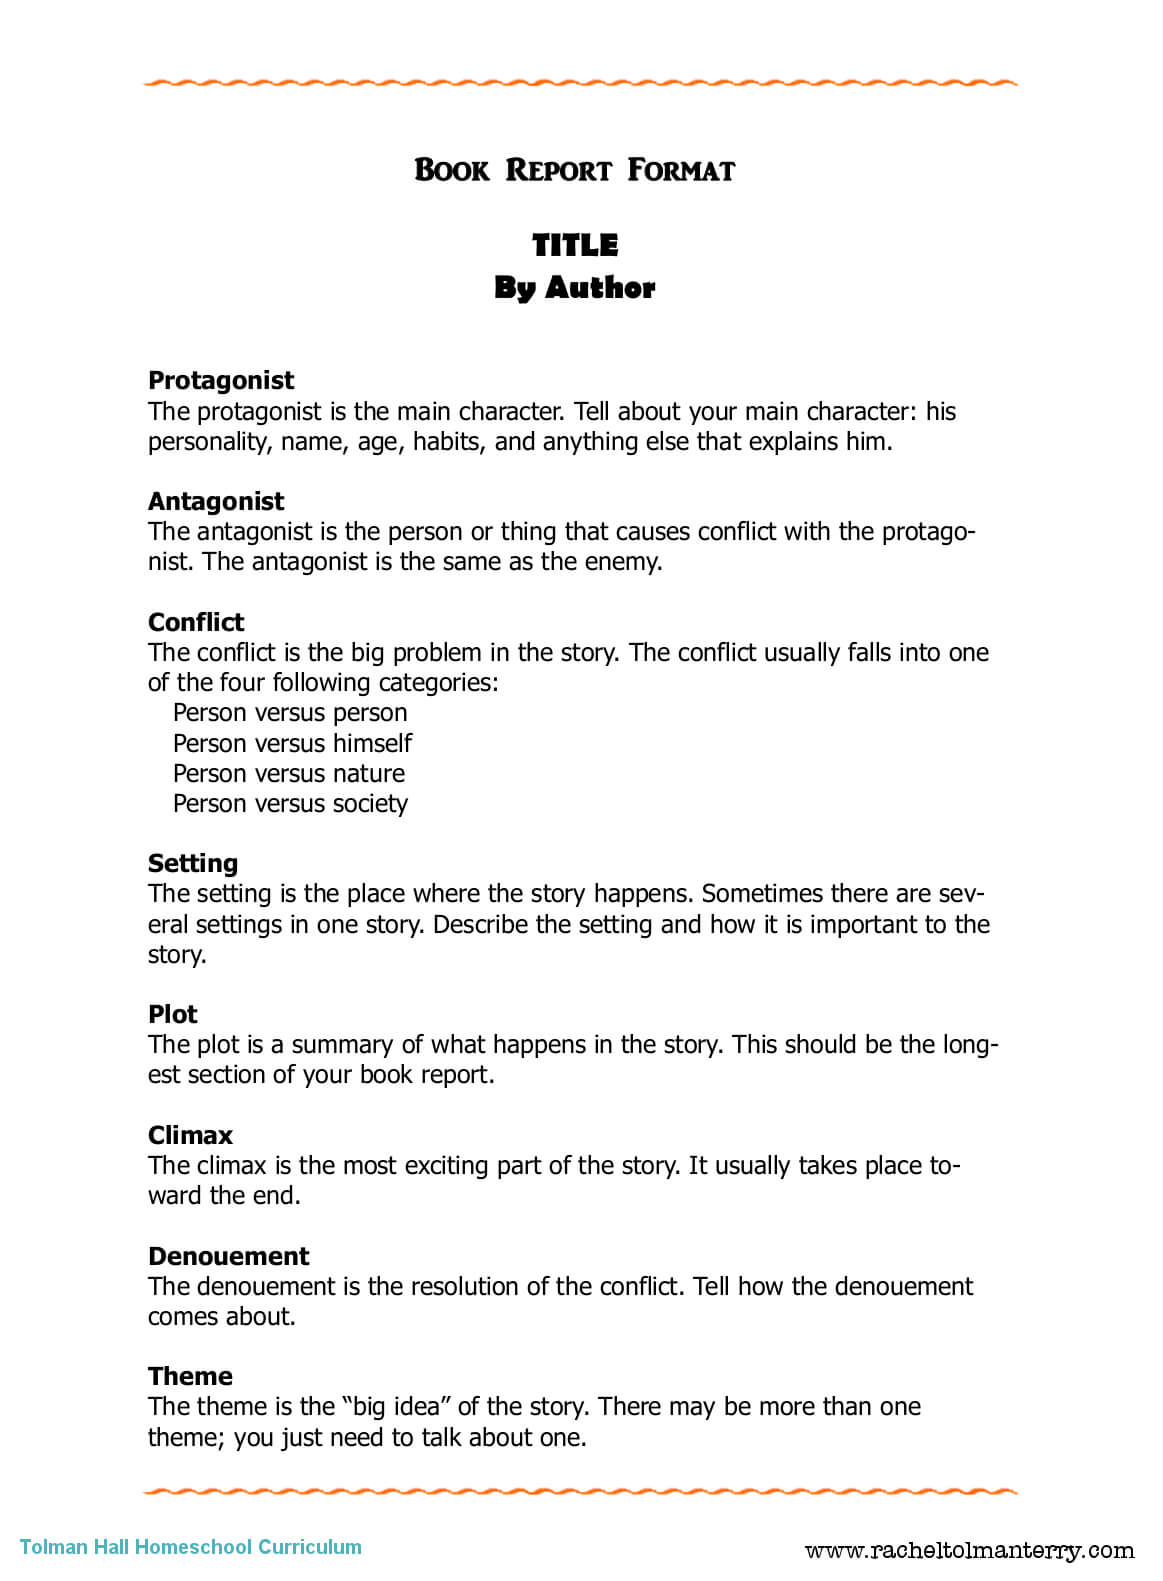 Easy Writingoline, English Law Essays Online. – Happy Hakka In College Book Report Template